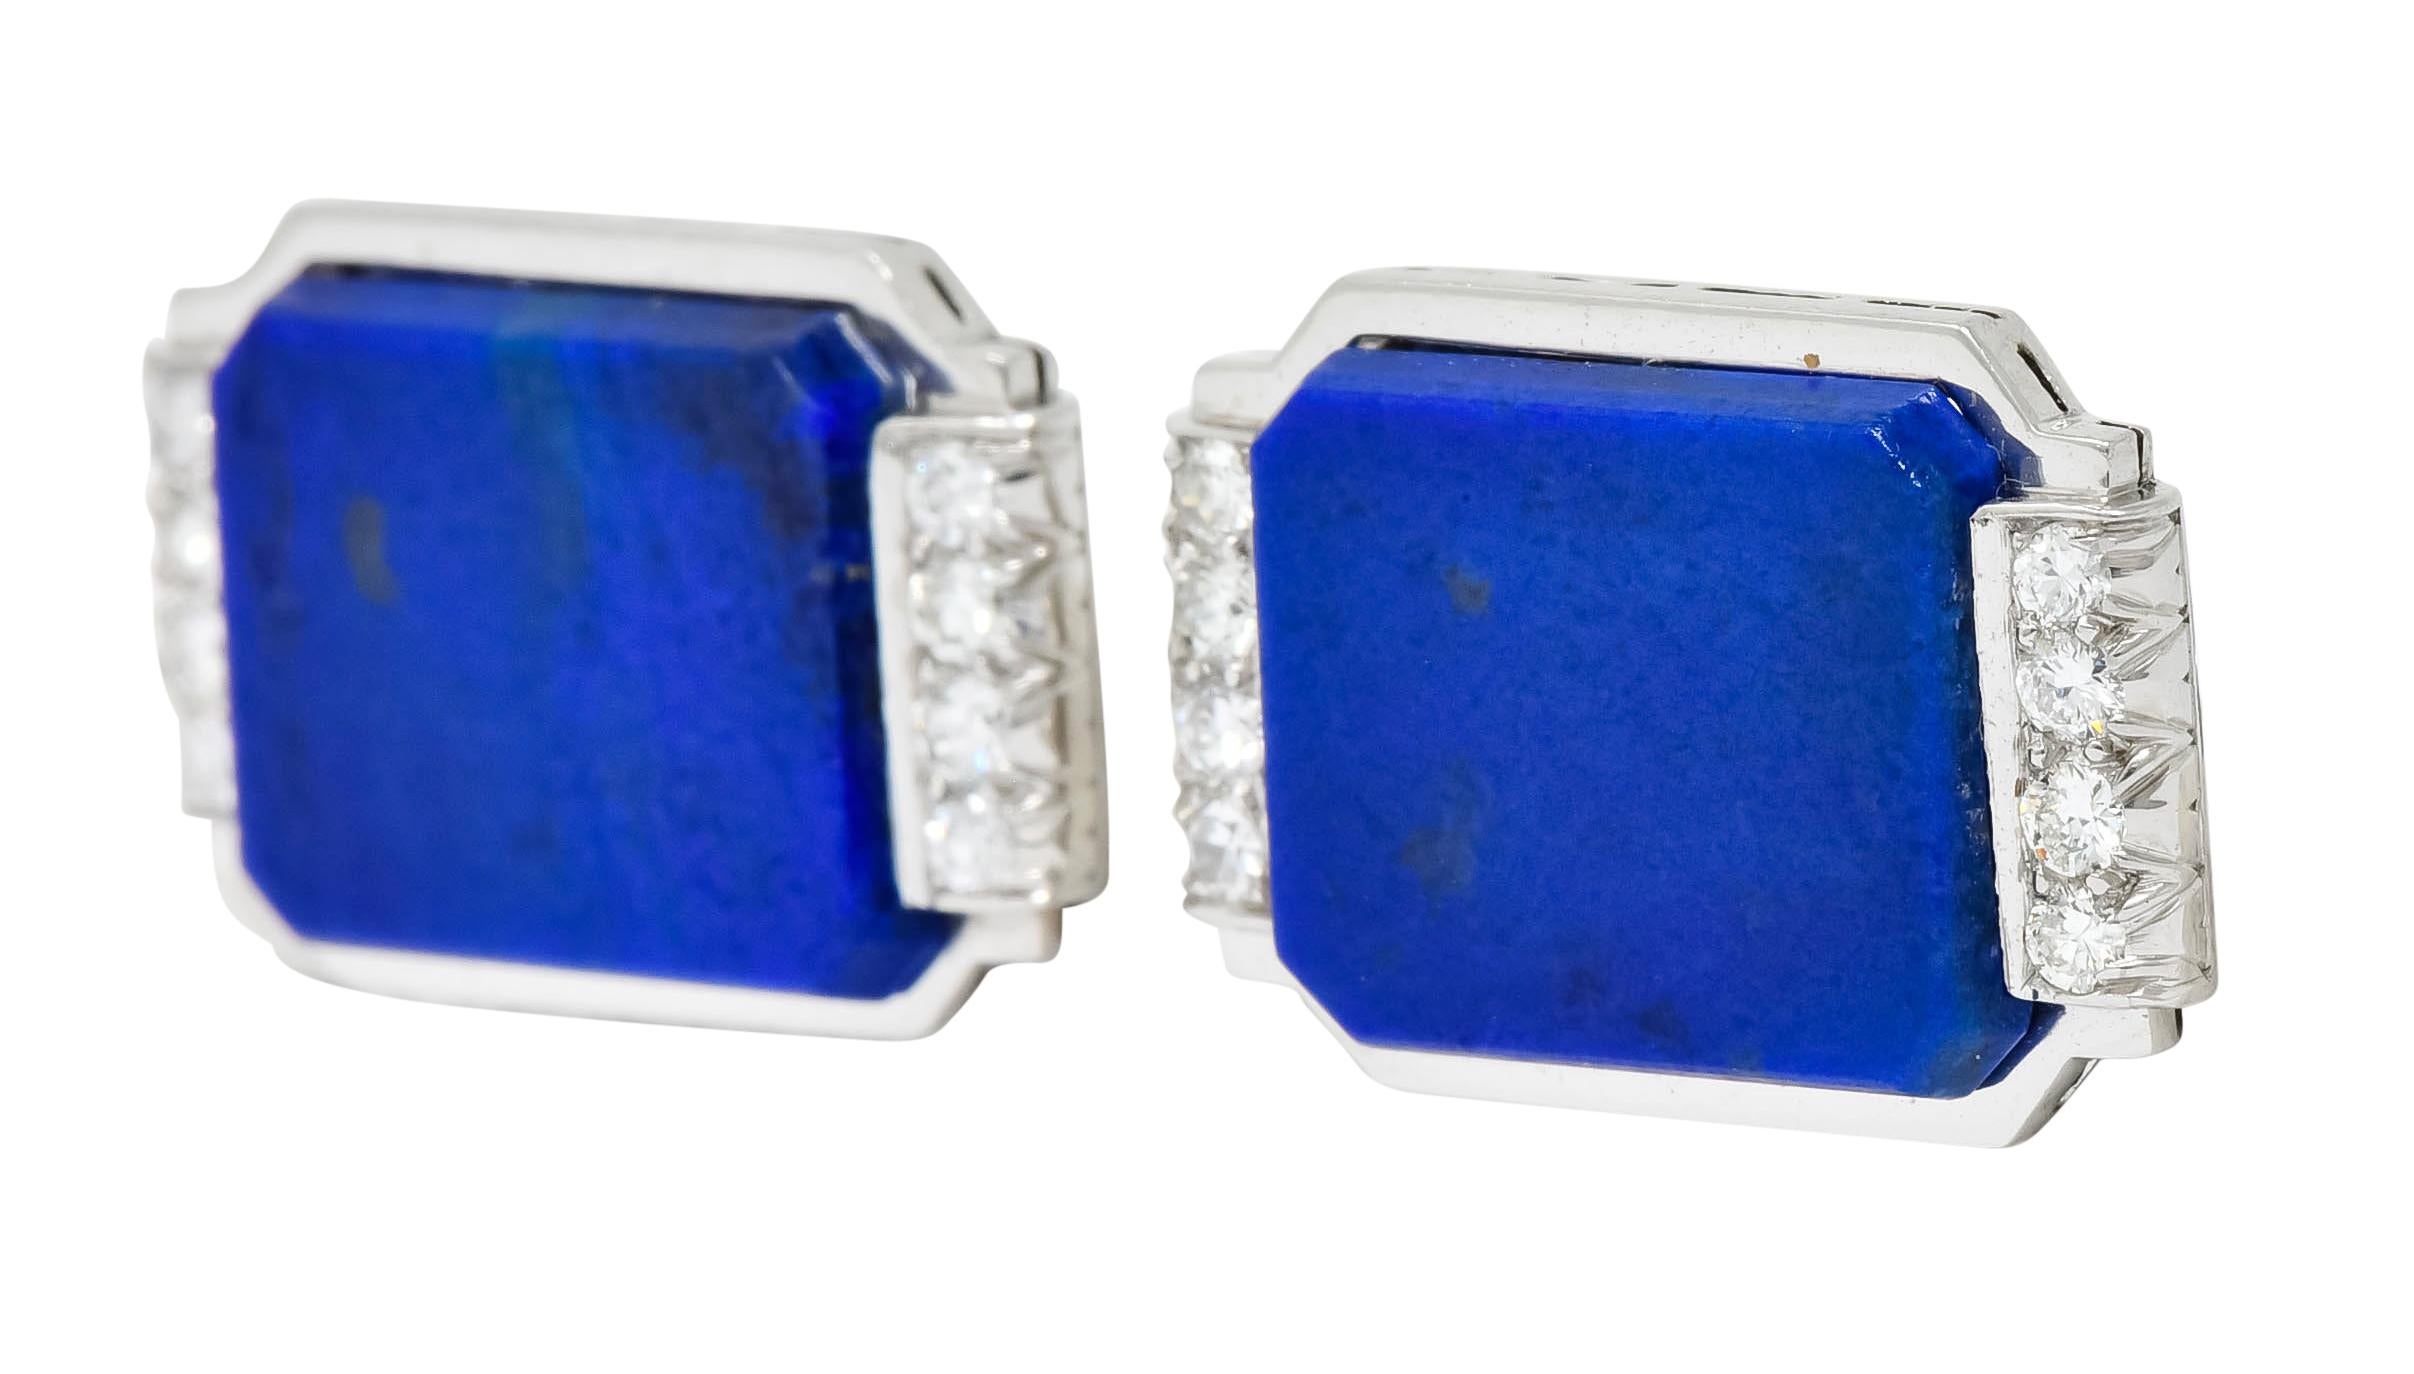 Link style cufflinks terminating on one end as a rectangle while opposing end is a bar

Rectangular end centers tablet cut lapis flanked by round brilliant cut diamonds weighing approximately 0.30 carat; eye-clean and white

Bar end is comprised of